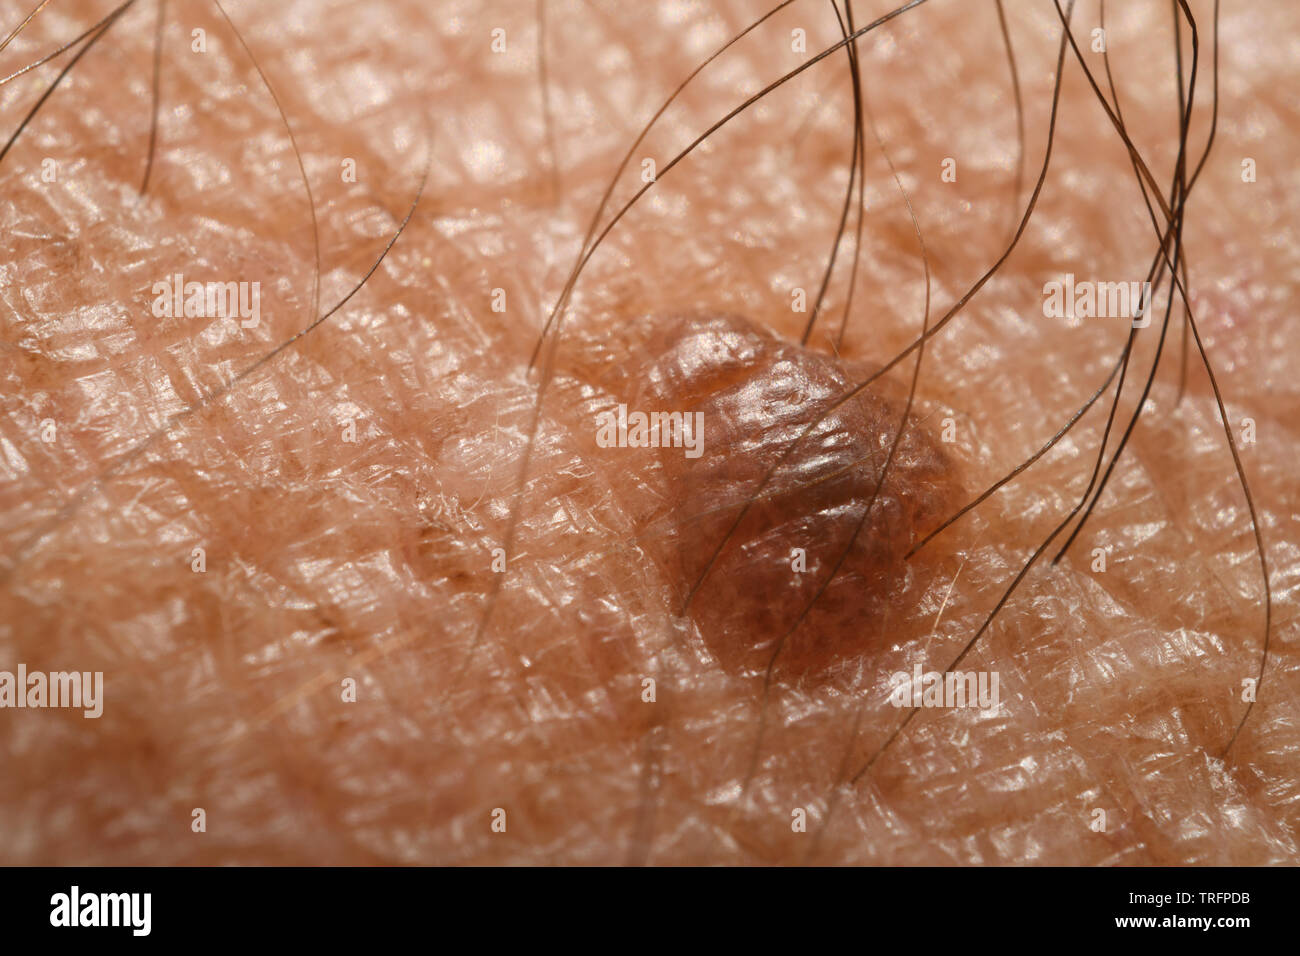 Close up of a skin mole nevus on a hairy arm Stock Photo